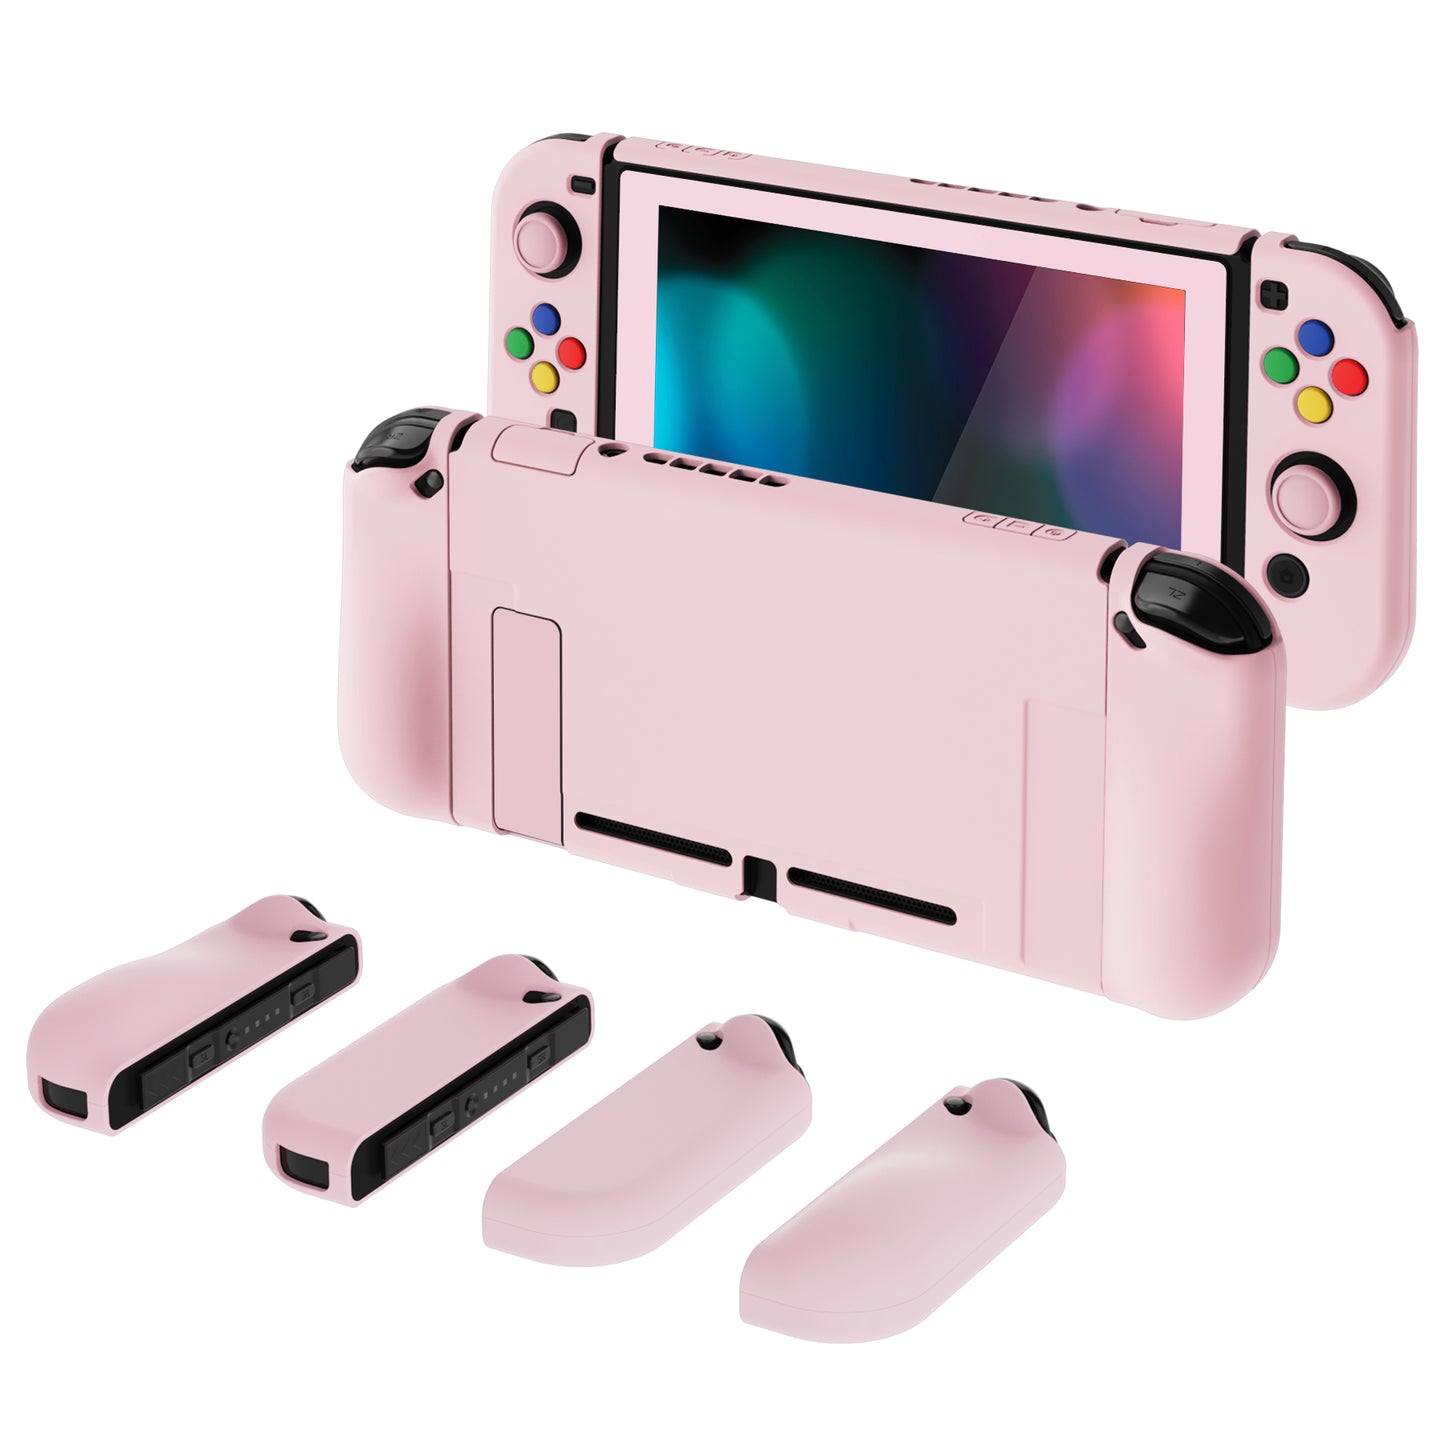 PlayVital AlterGrips Dockable Protective Case Ergonomic Grip Cover for Nintendo Switch, Interchangeable Joycon Cover w/Screen Protector & Thumb Grip Caps & Button Caps - Cherry Blossoms Pink - TNSYP3007 playvital